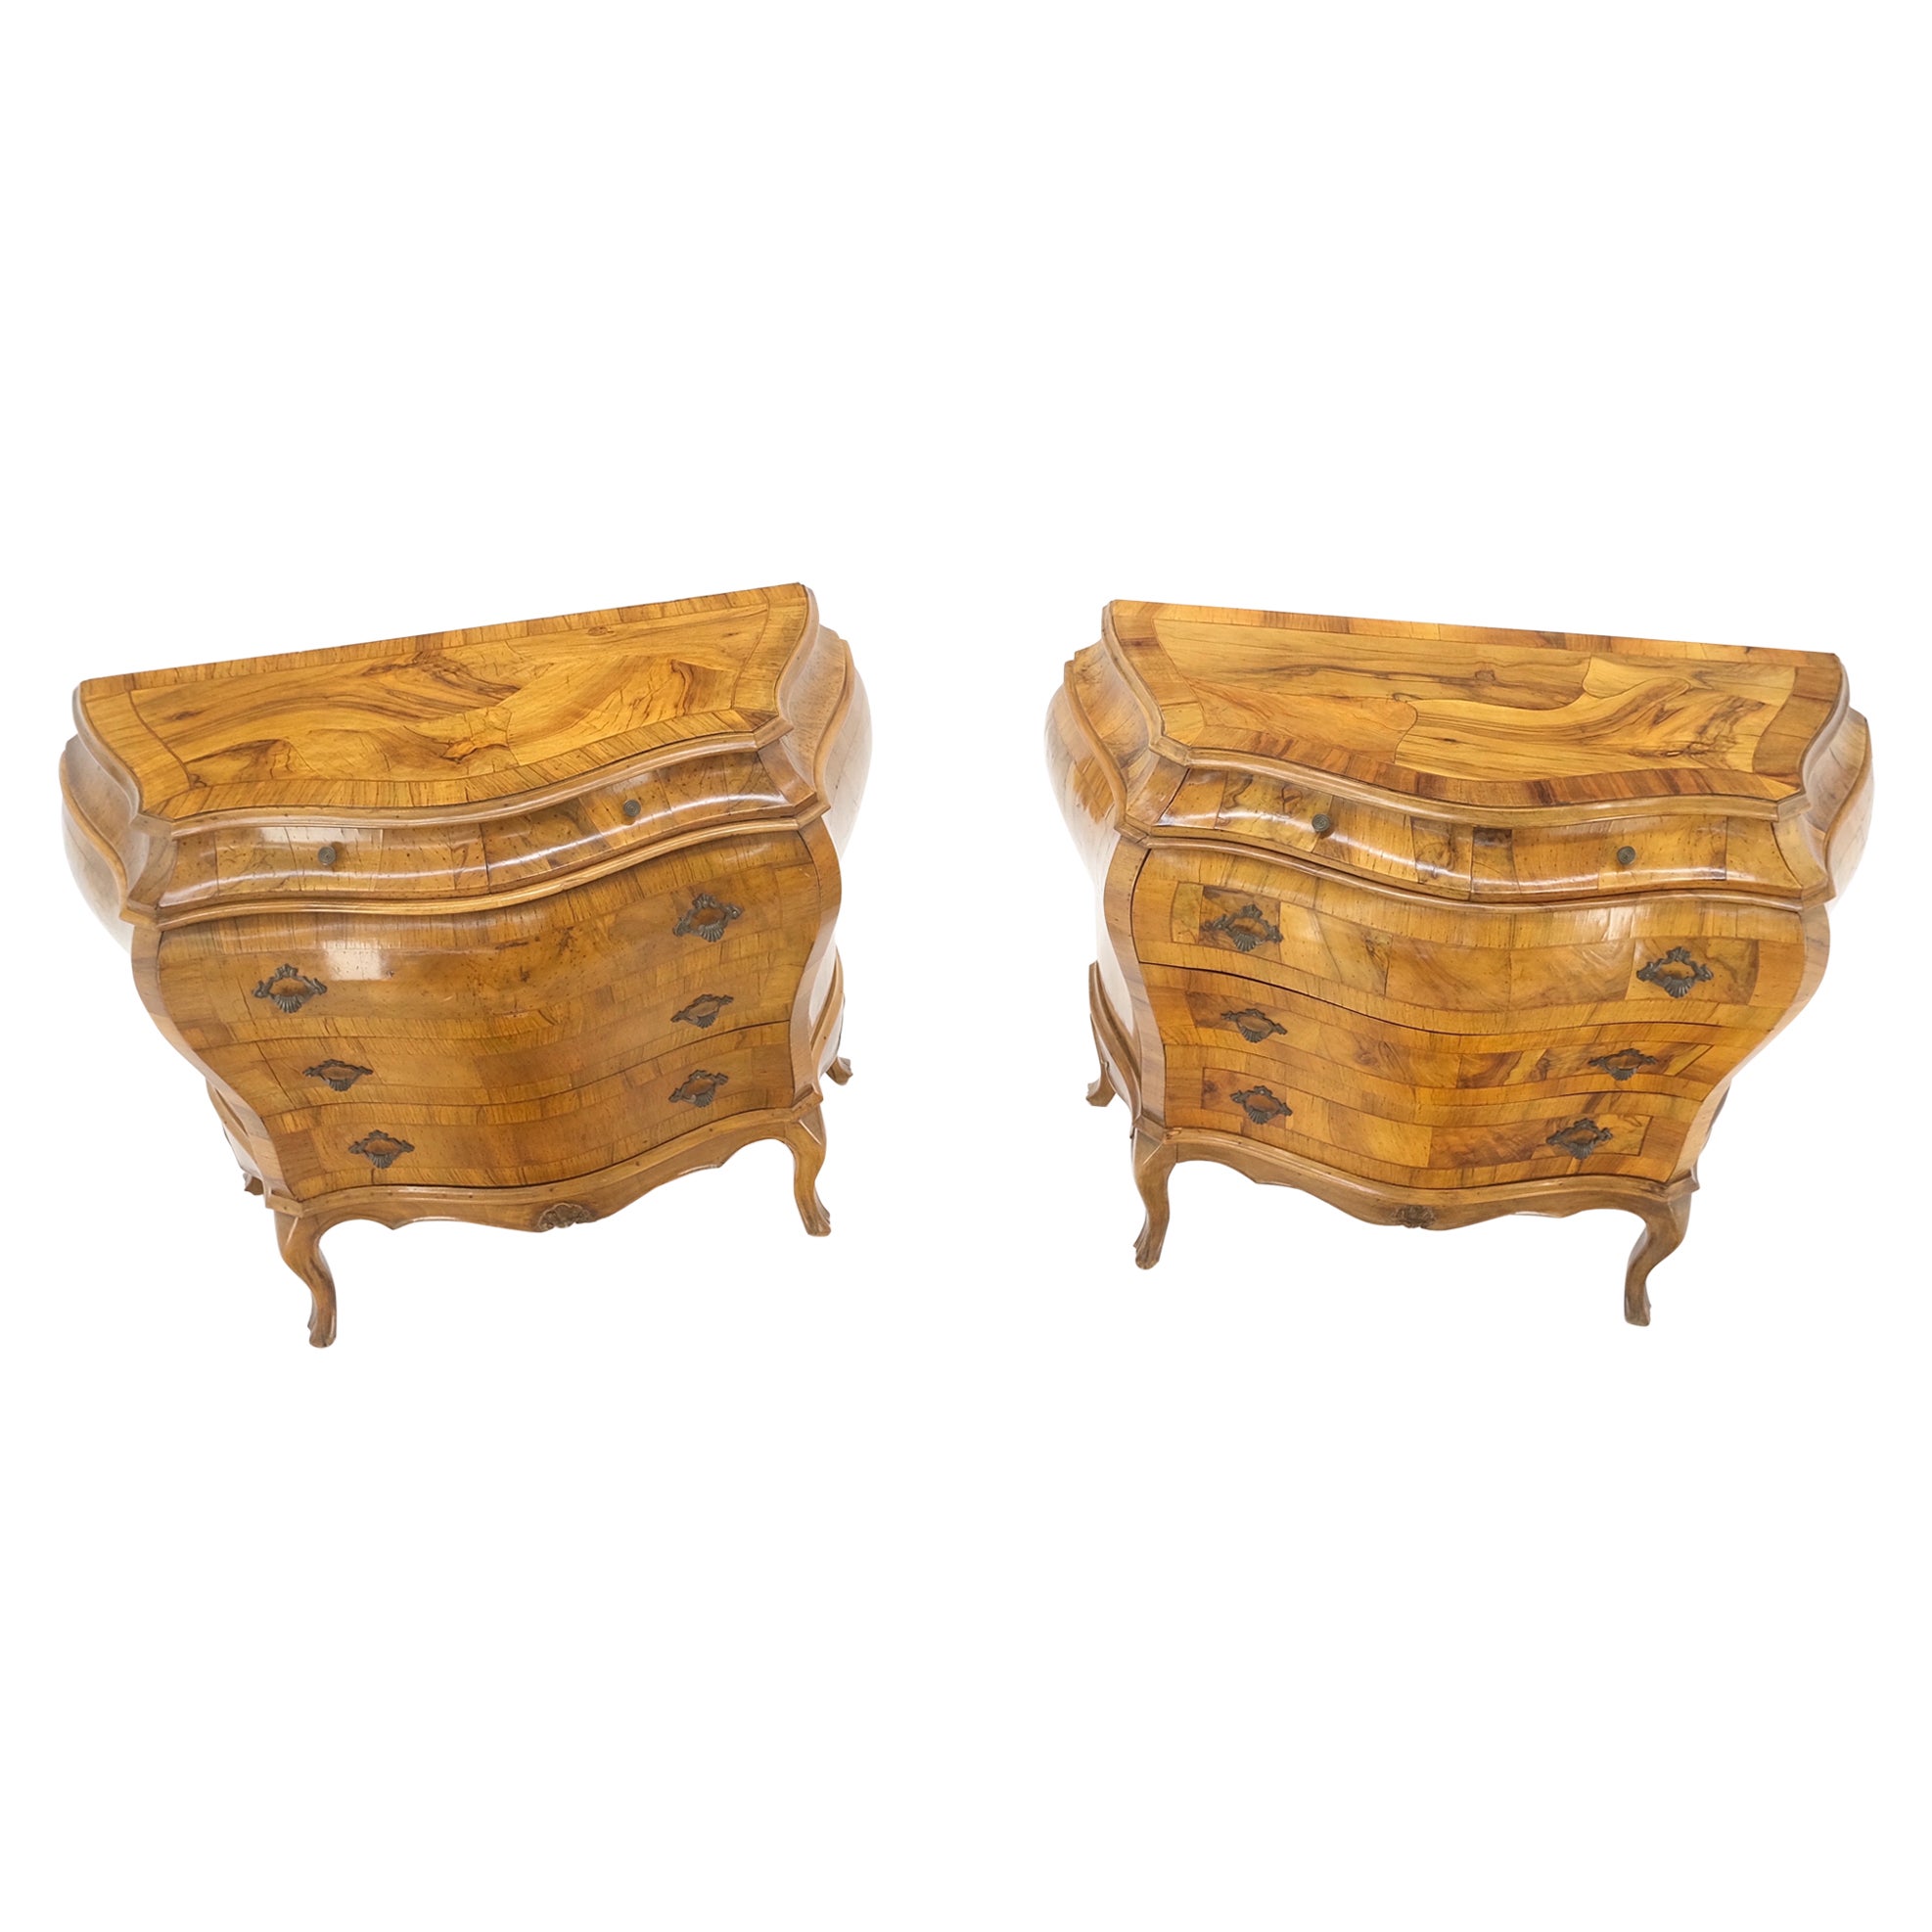 Pair of Italian Olive Burl Wood Patched Veneer Bombay Small Dresser Stands Table For Sale